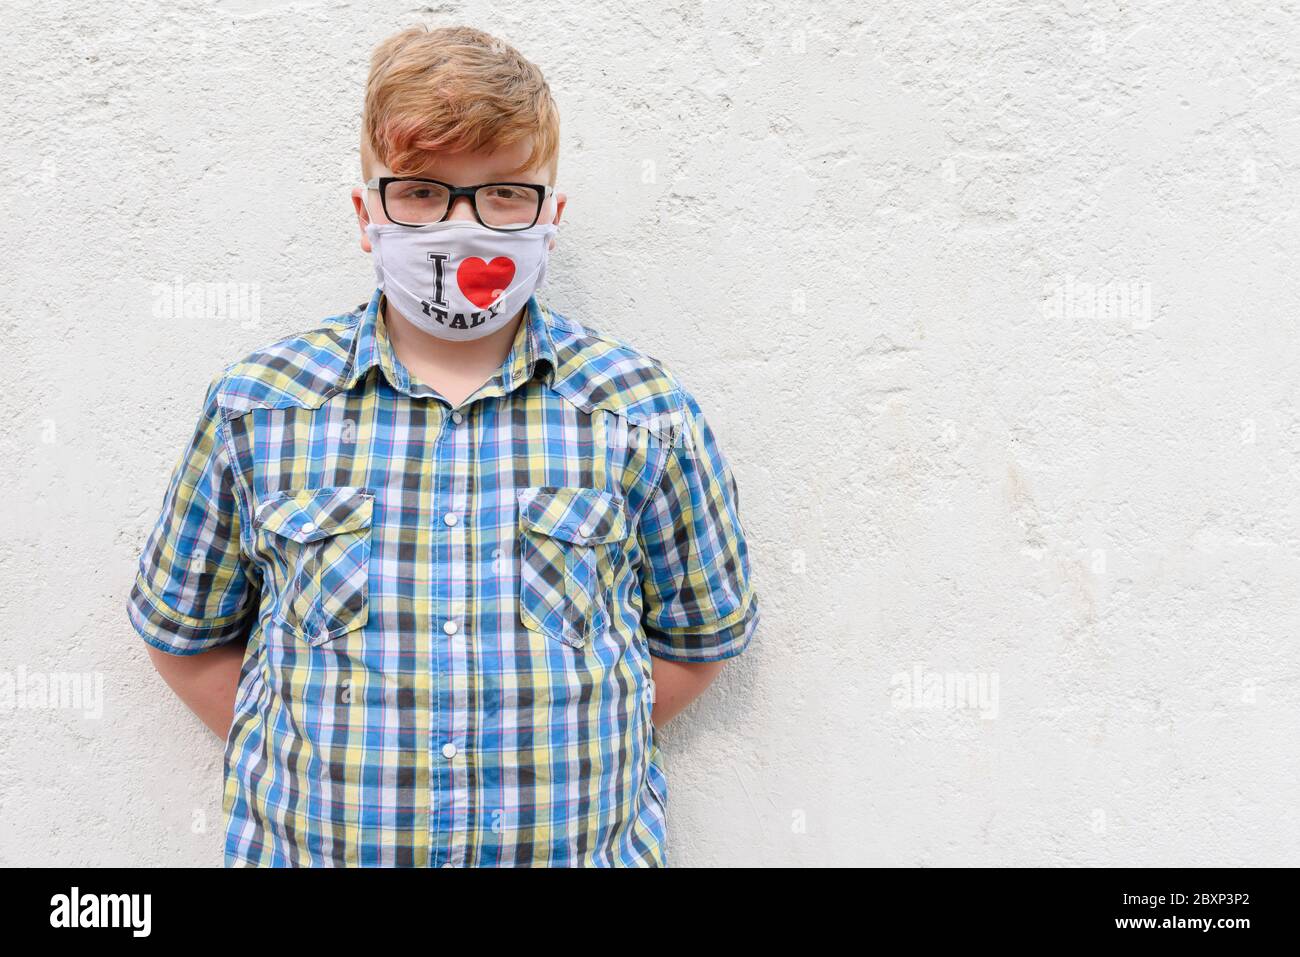 Red-haired boy with glasses and surgical mask with the inscription I LOVE ITALY. A boy in a plaid shirt stands on a wall background. Stock Photo